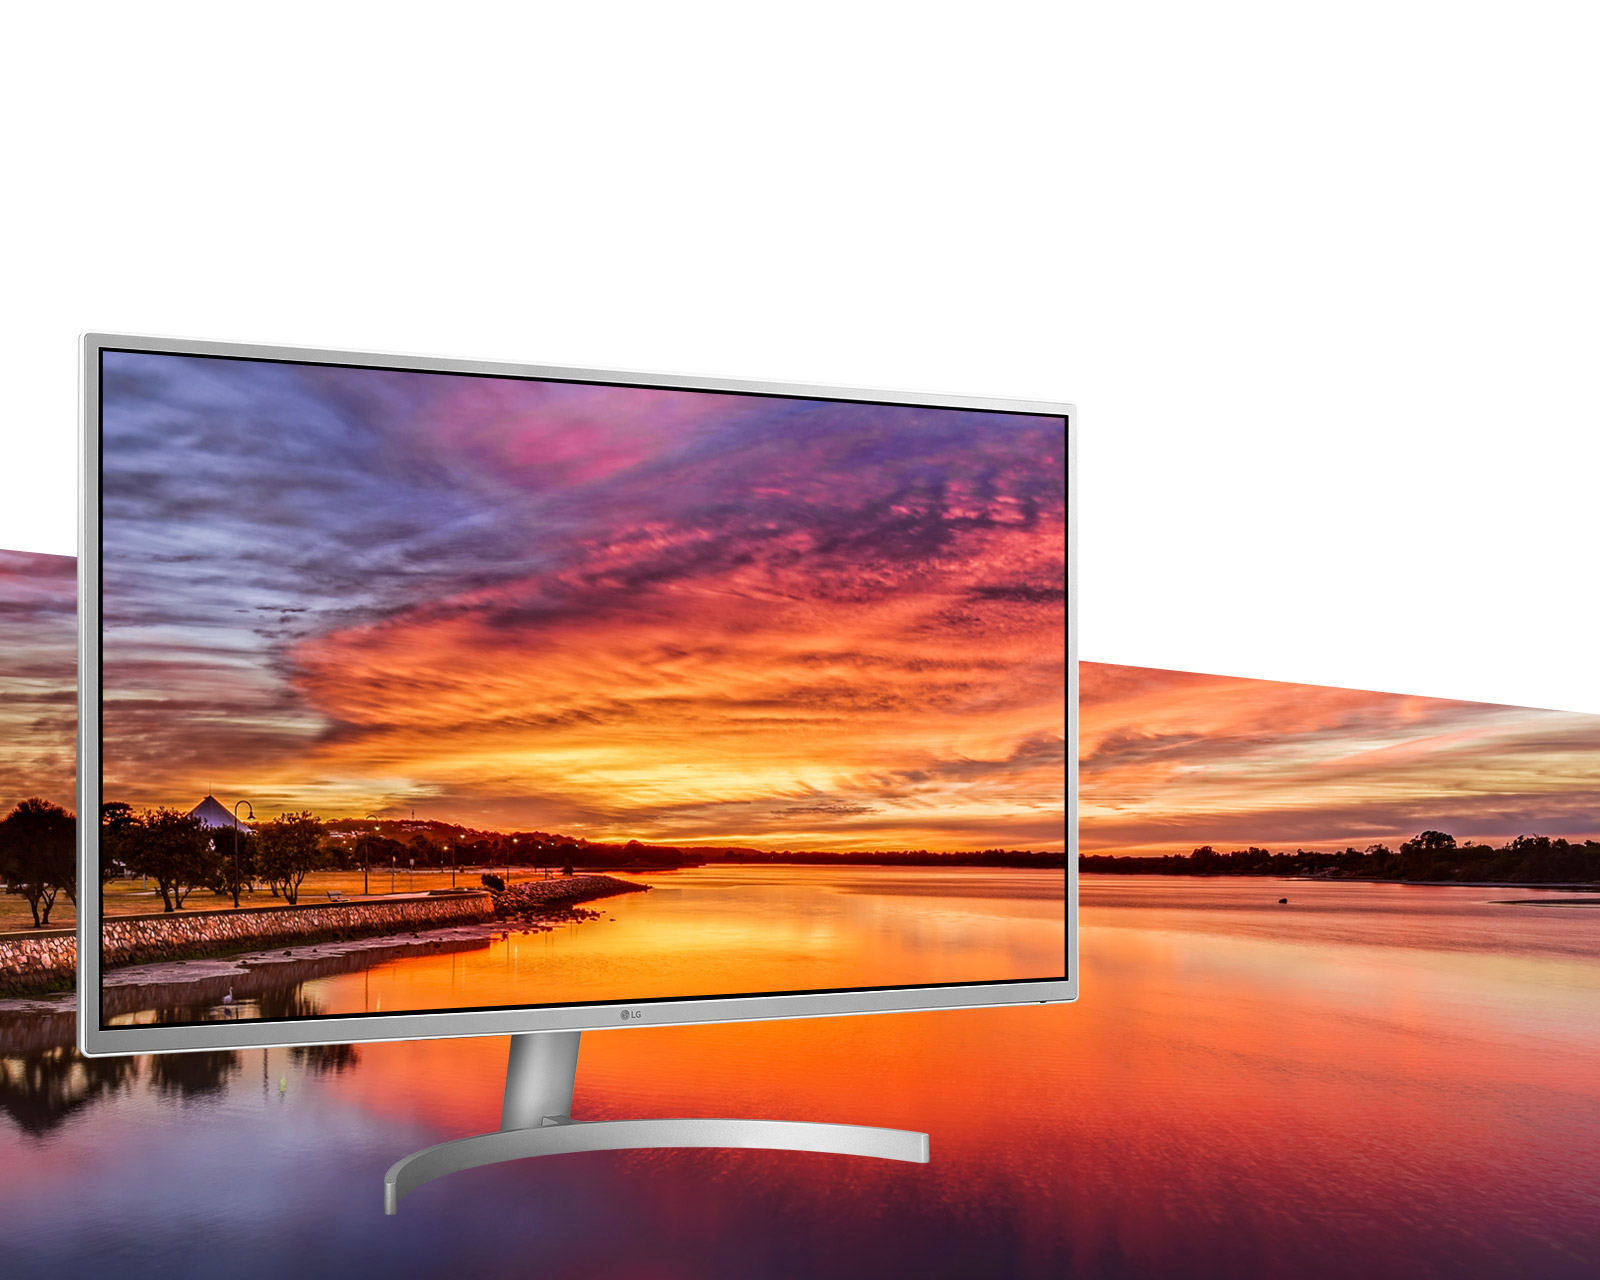 The LG 32QK500-W monitor showing an image of a lake during orange dusk twilight, the image continues as the background of the entire banner